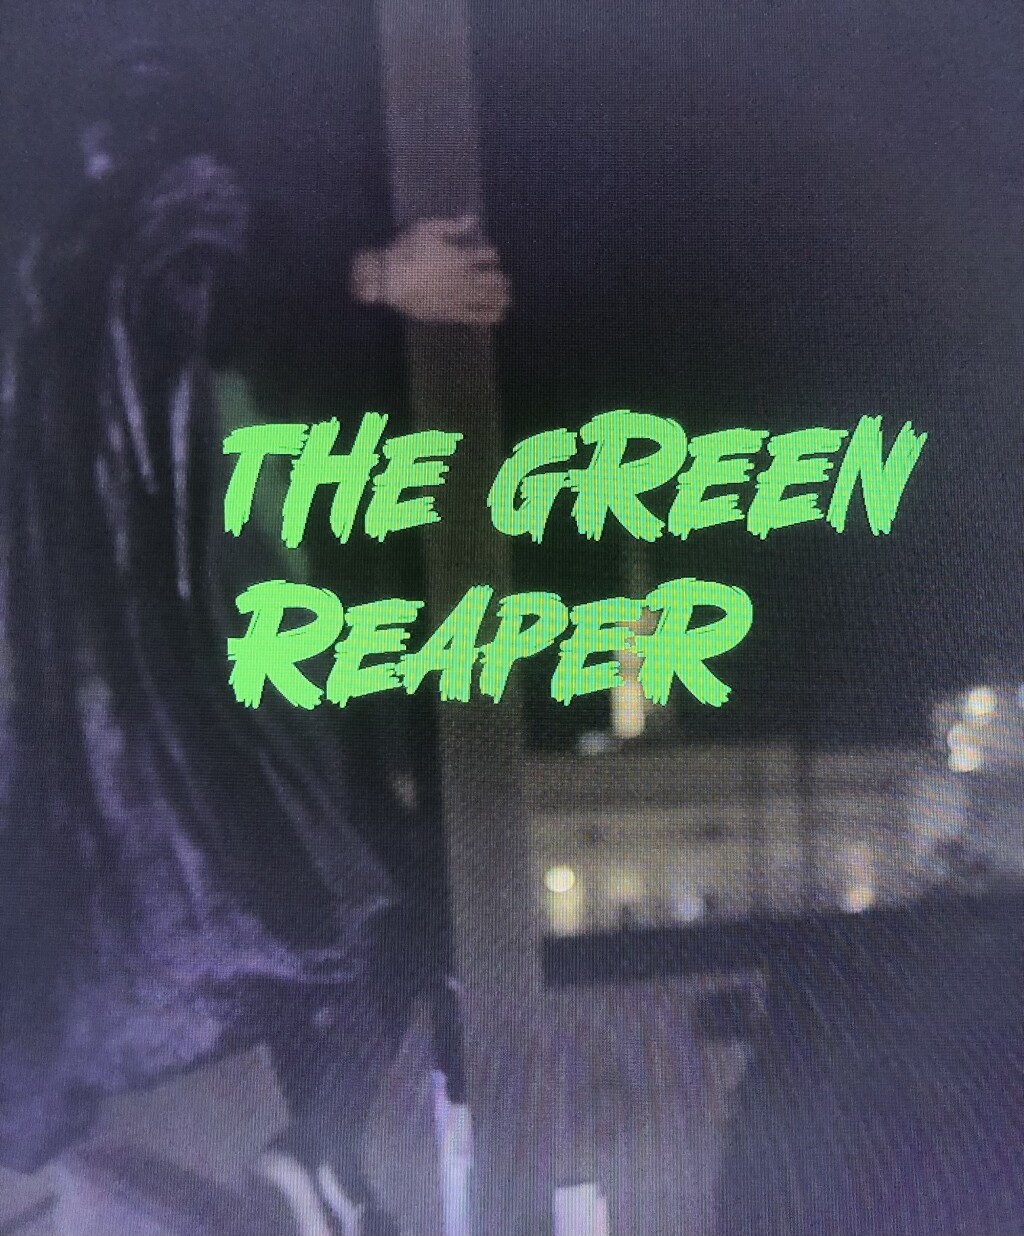 Filmposter for The Green Reaper